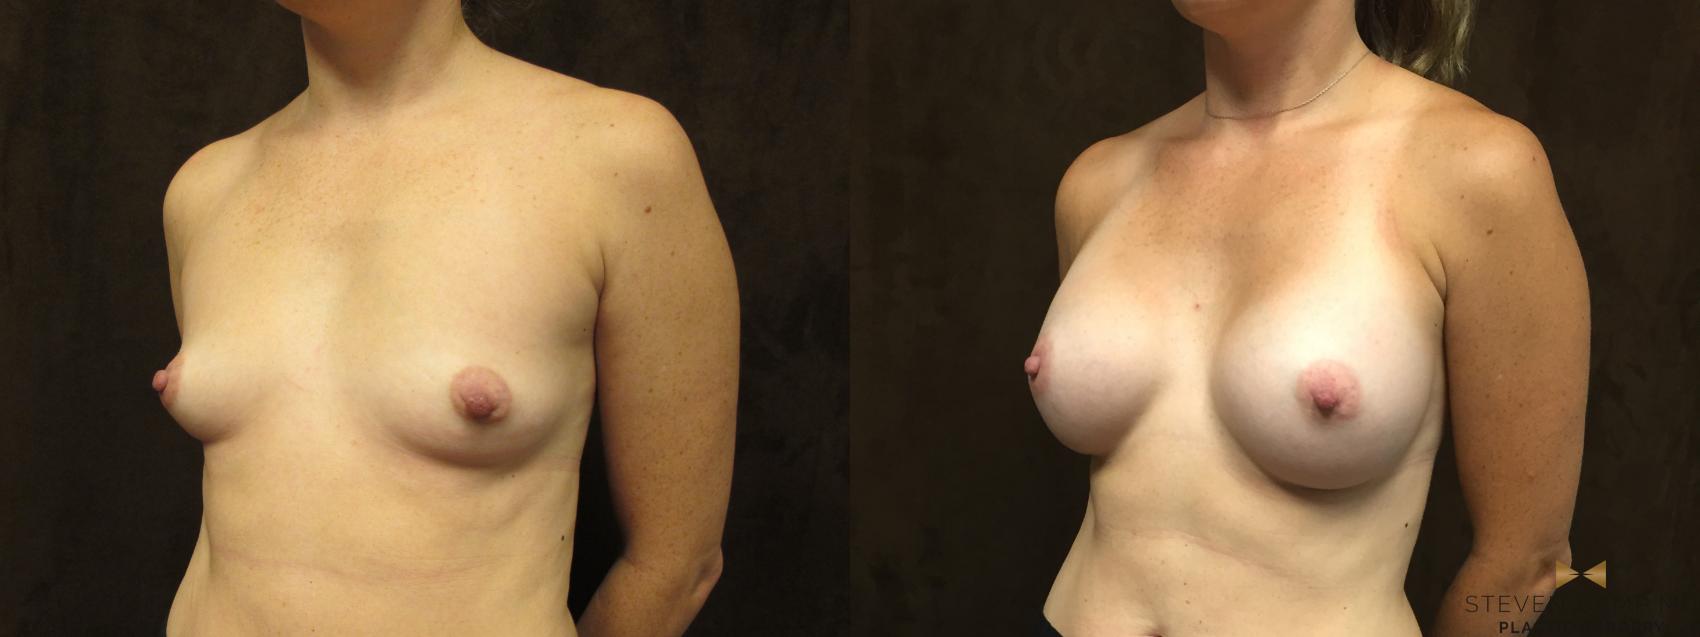 Breast Augmentation Before & After Photo | Fort Worth, Texas | Steven Camp MD Plastic Surgery